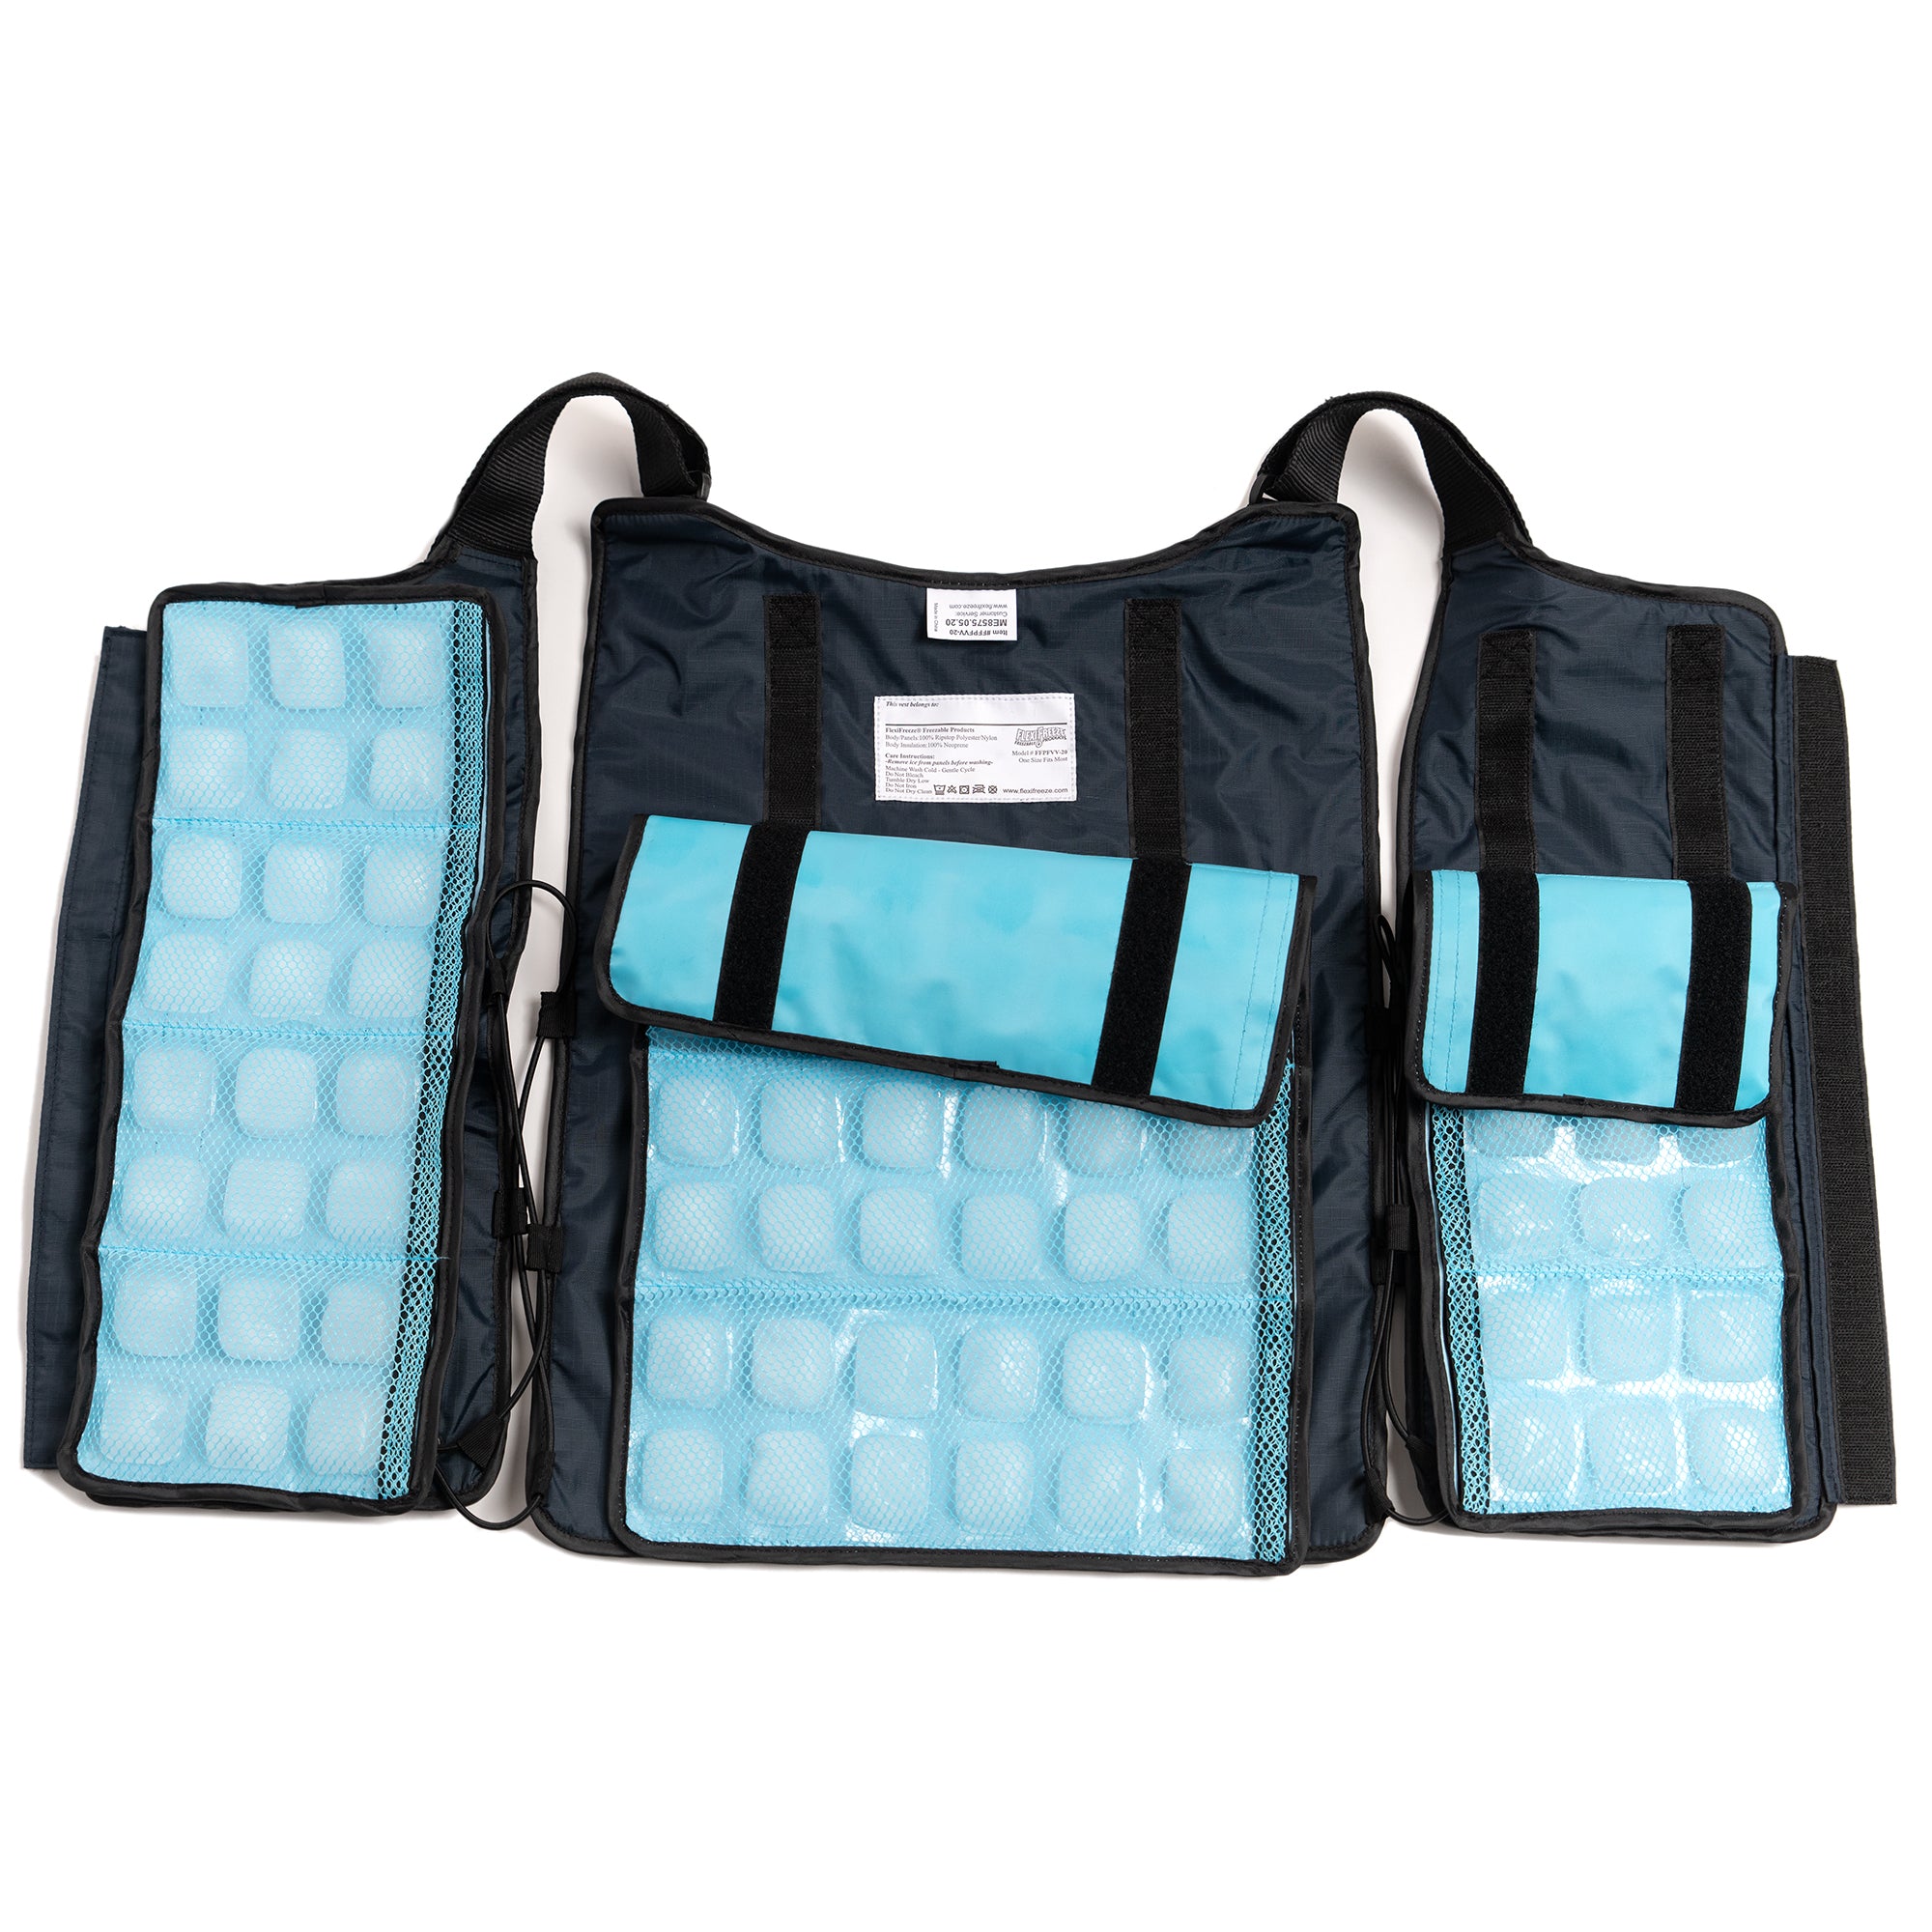 Professional Series Cooling Kit - Blue Velcro, includes replacement panels, blue ice vest, gray insulated bag, and FlexiFreeze ice sheet